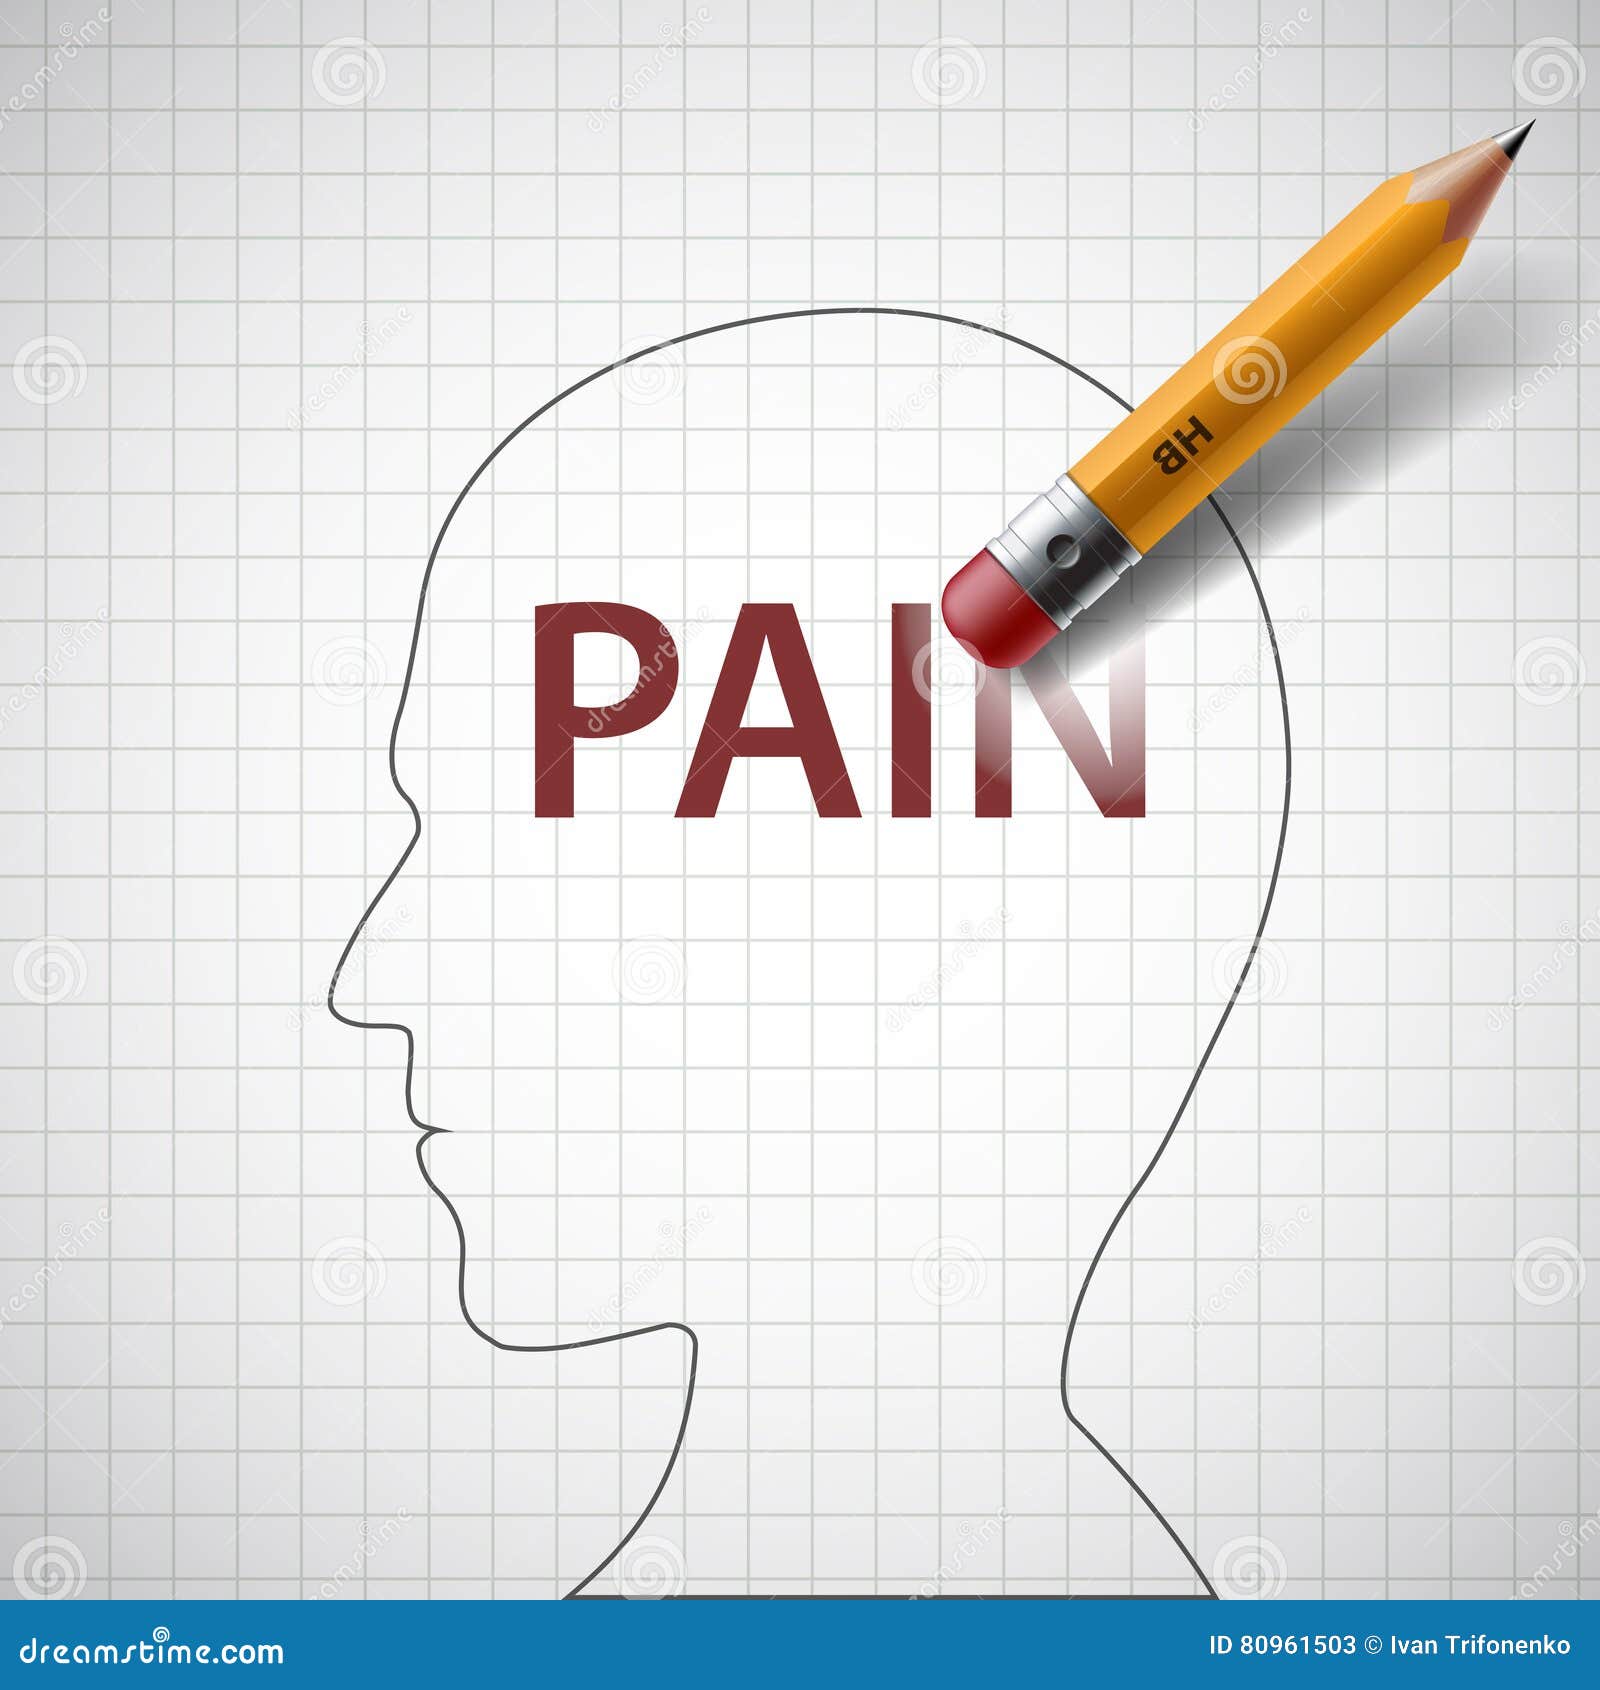 pencil erases in the human head the word pain.